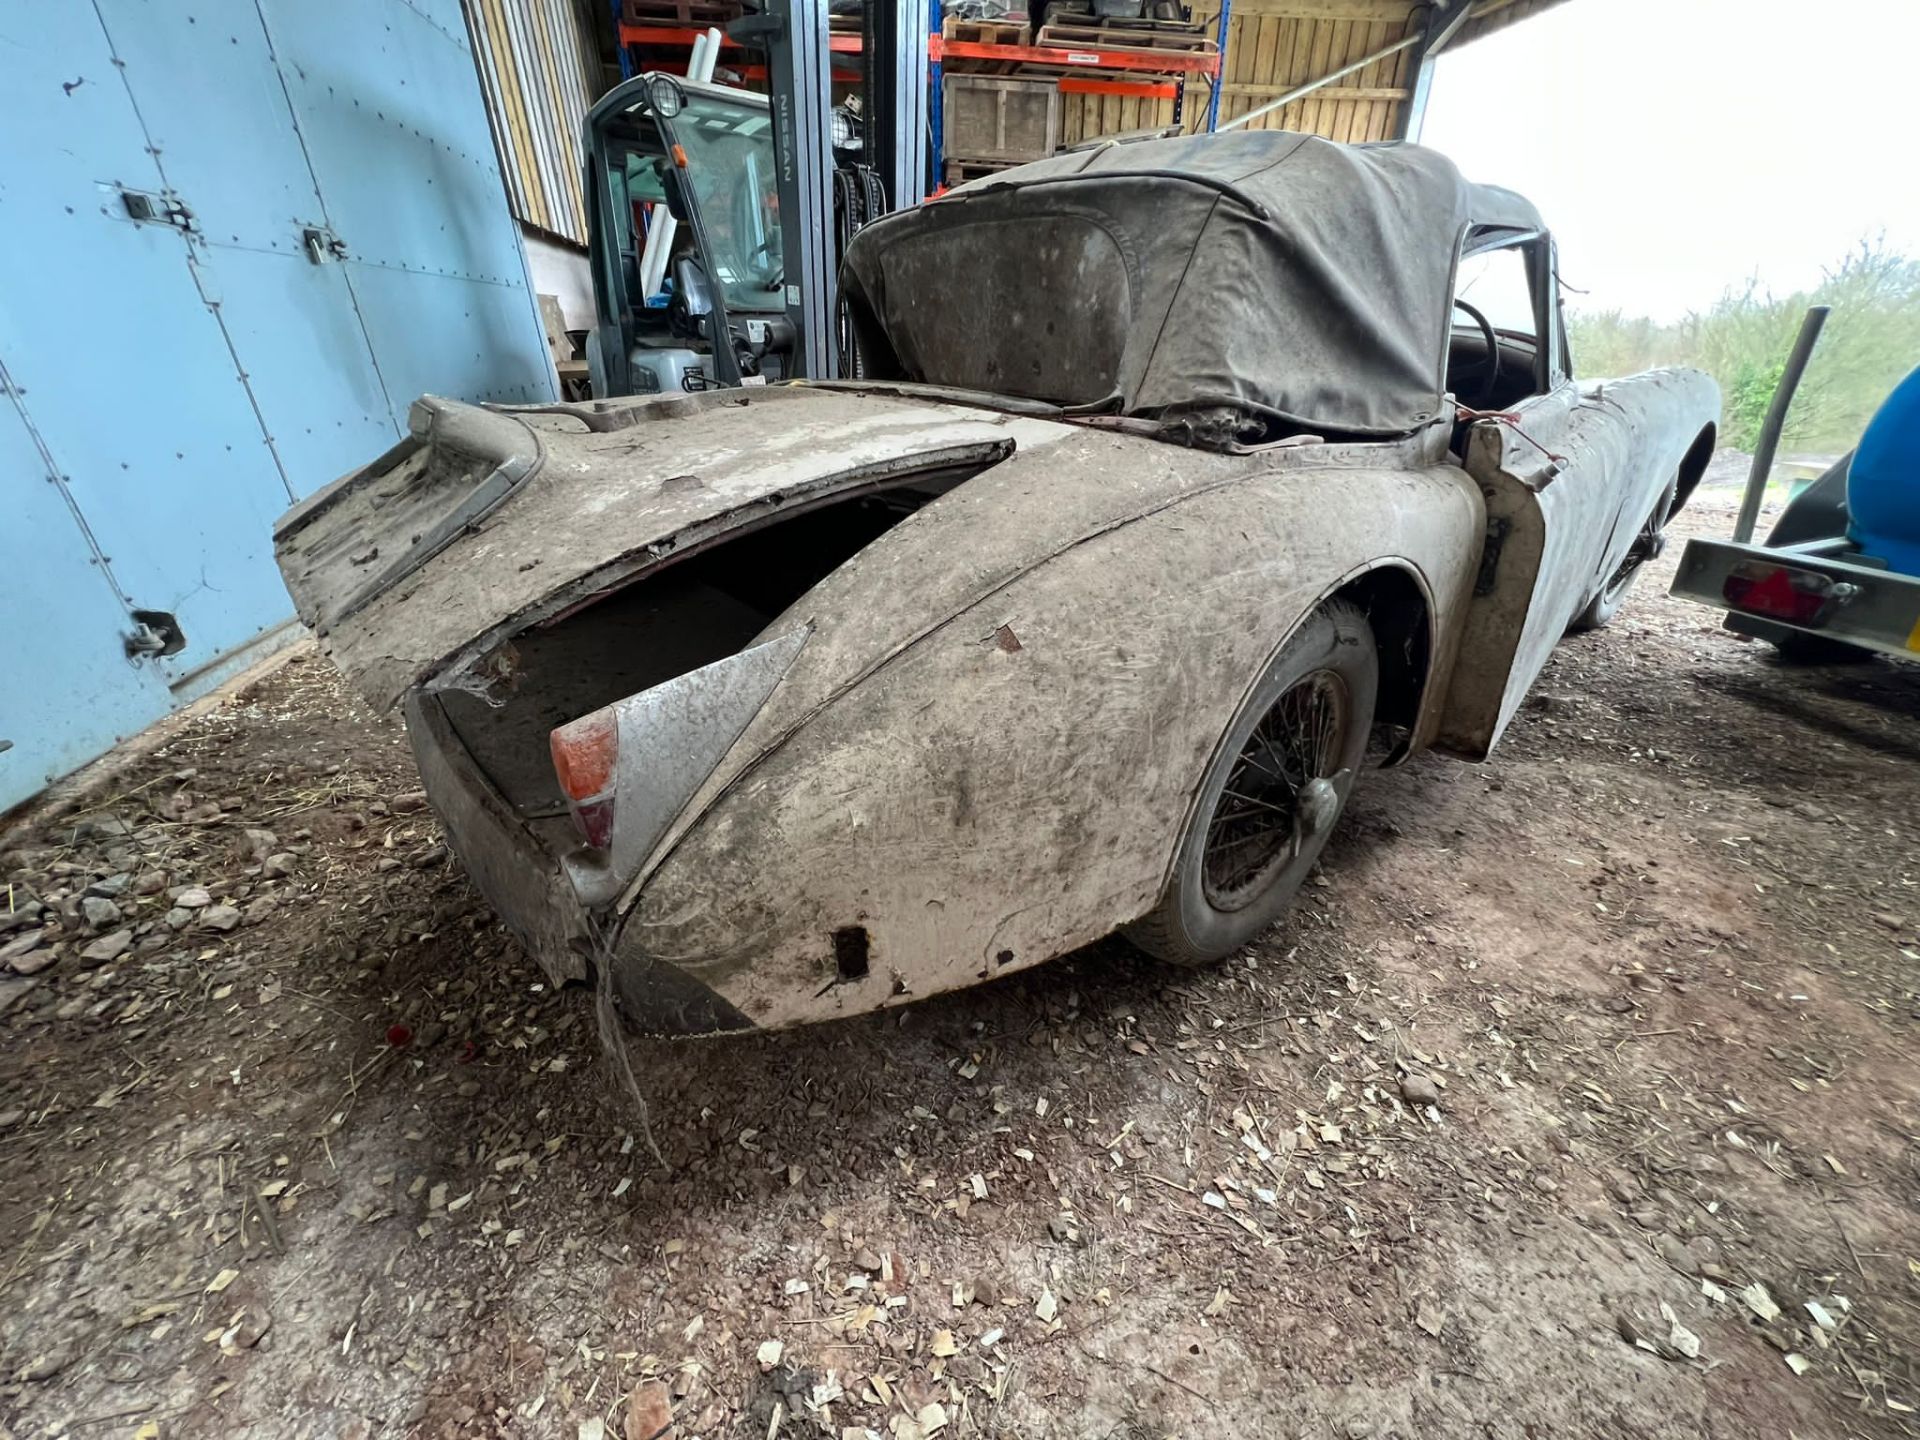 Jaguar XK150 3.4 Drop Head Coupe 1958 Barn Find. Matching numbers. - Image 23 of 27